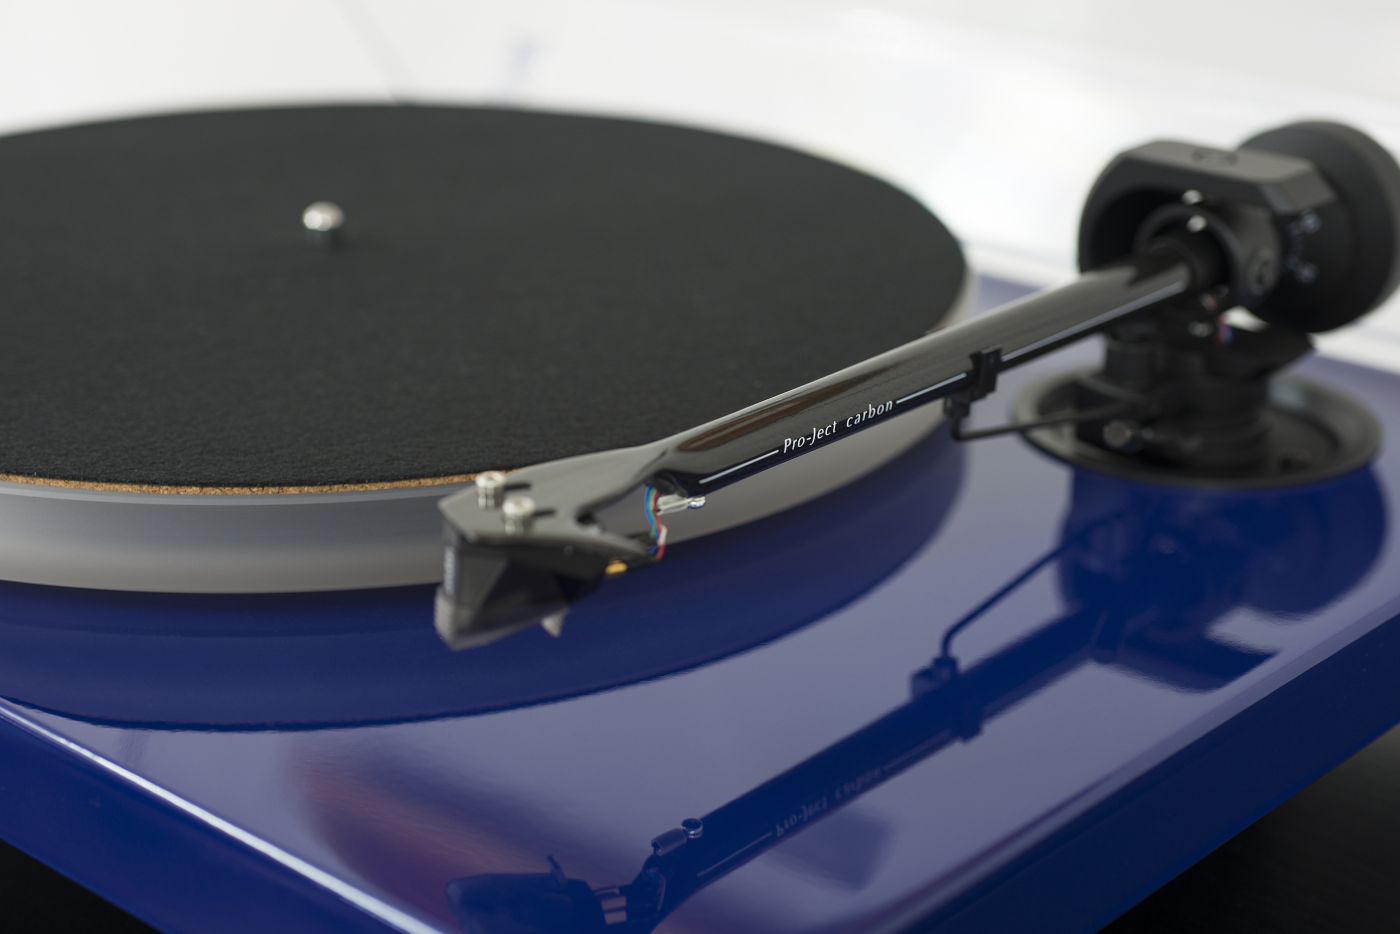 project-1-xpression-carbon-ukx-turntable.jpg